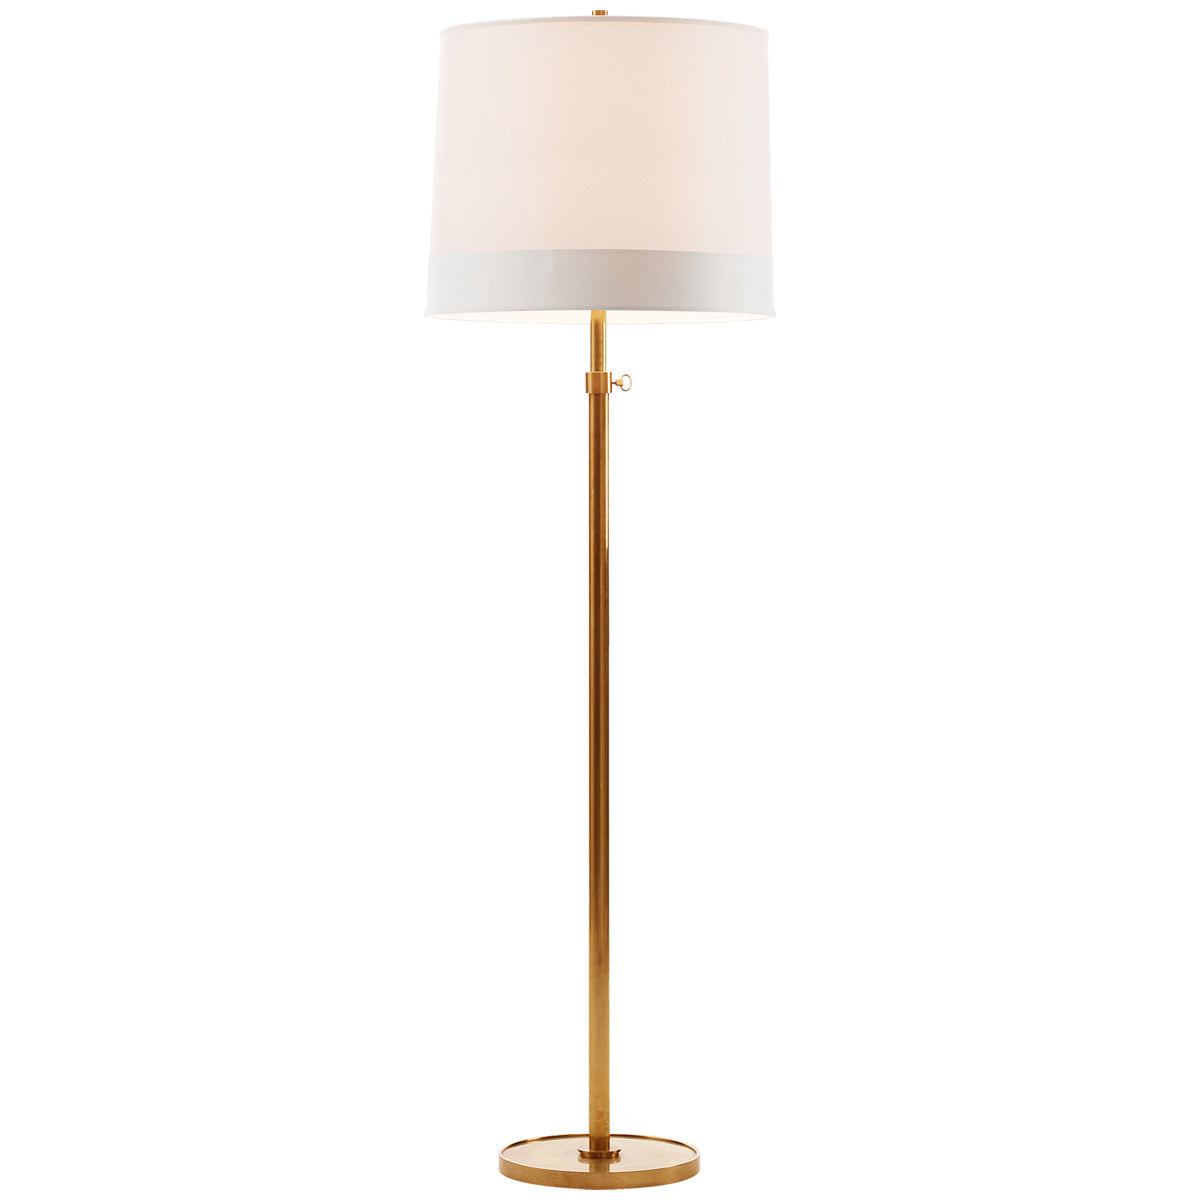 Visual Comfort Simple Floor Lamp with Silk Banded Shade